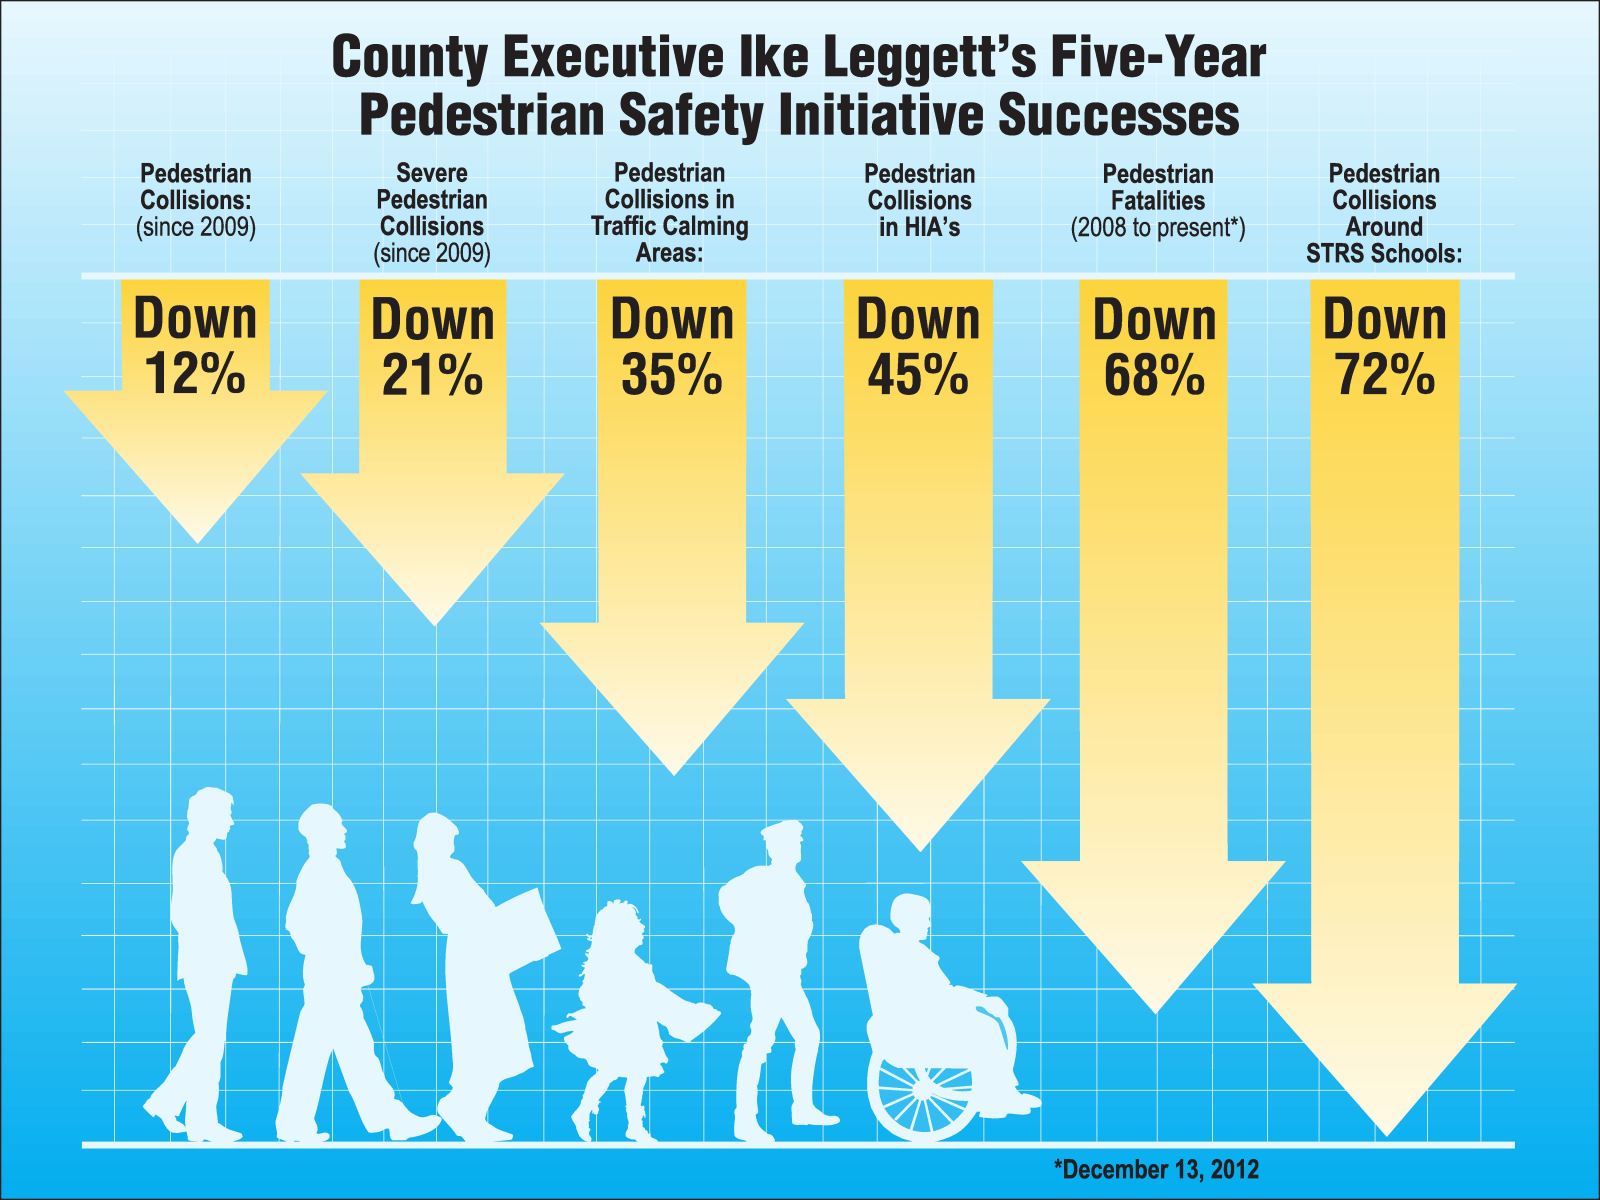 Graphic showing results of County Executive Leggett's Pedestrian Safety Initiative